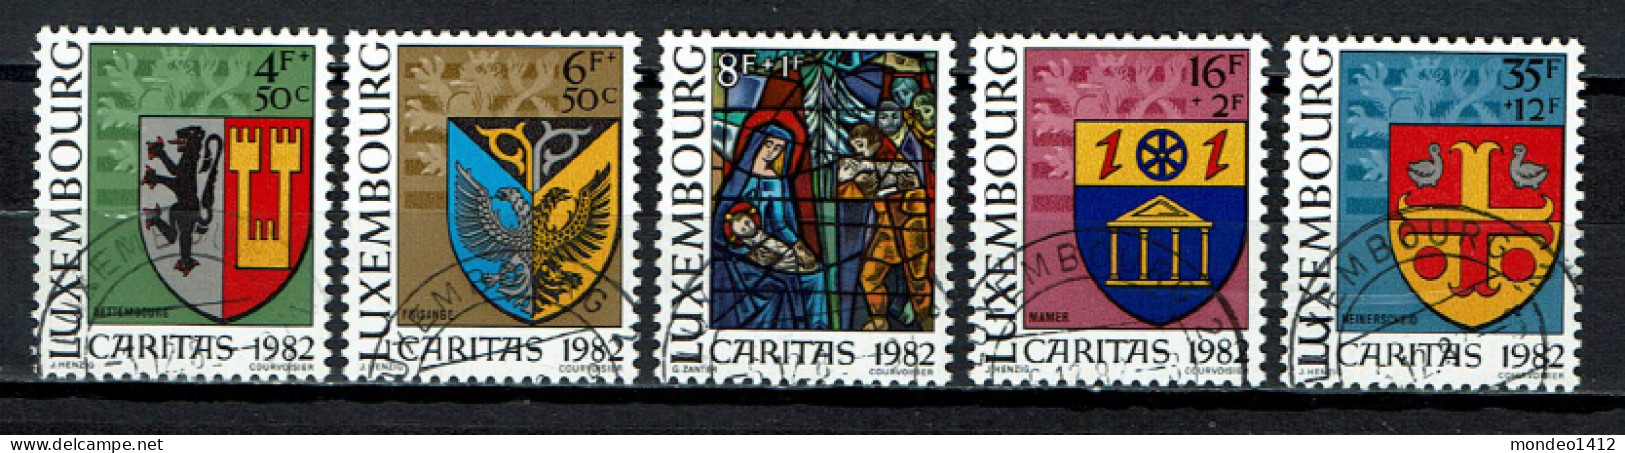 Luxembourg 1982 - YT 1013/1017 - Town Arms - Caritas Issue, Armoiries Communales Et Vitrail, Wappenschilde - Usati